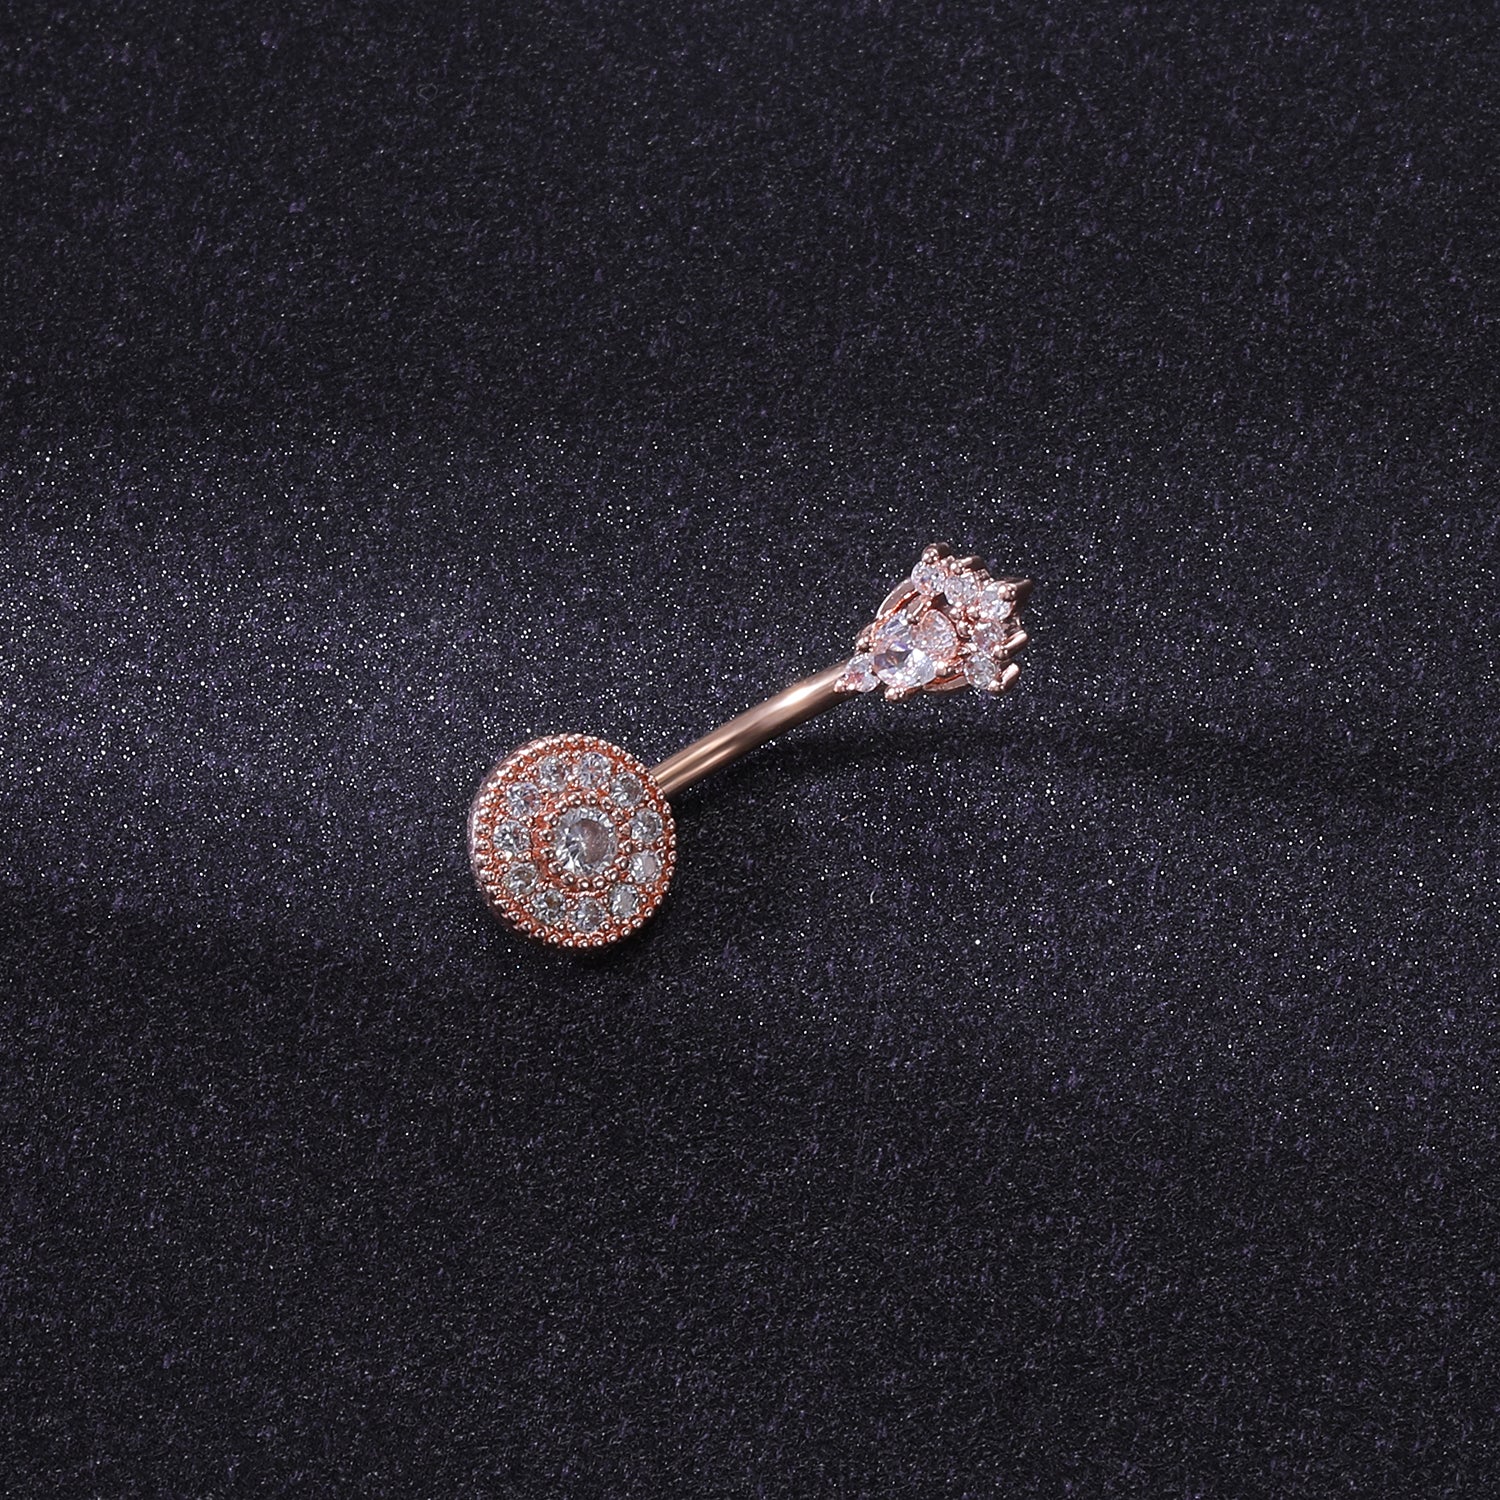 14g-Footprint-Round-Navel-Rings-Rose-Gold-Cubic-Zirconia-Belly-Button-Rings-Jewelry